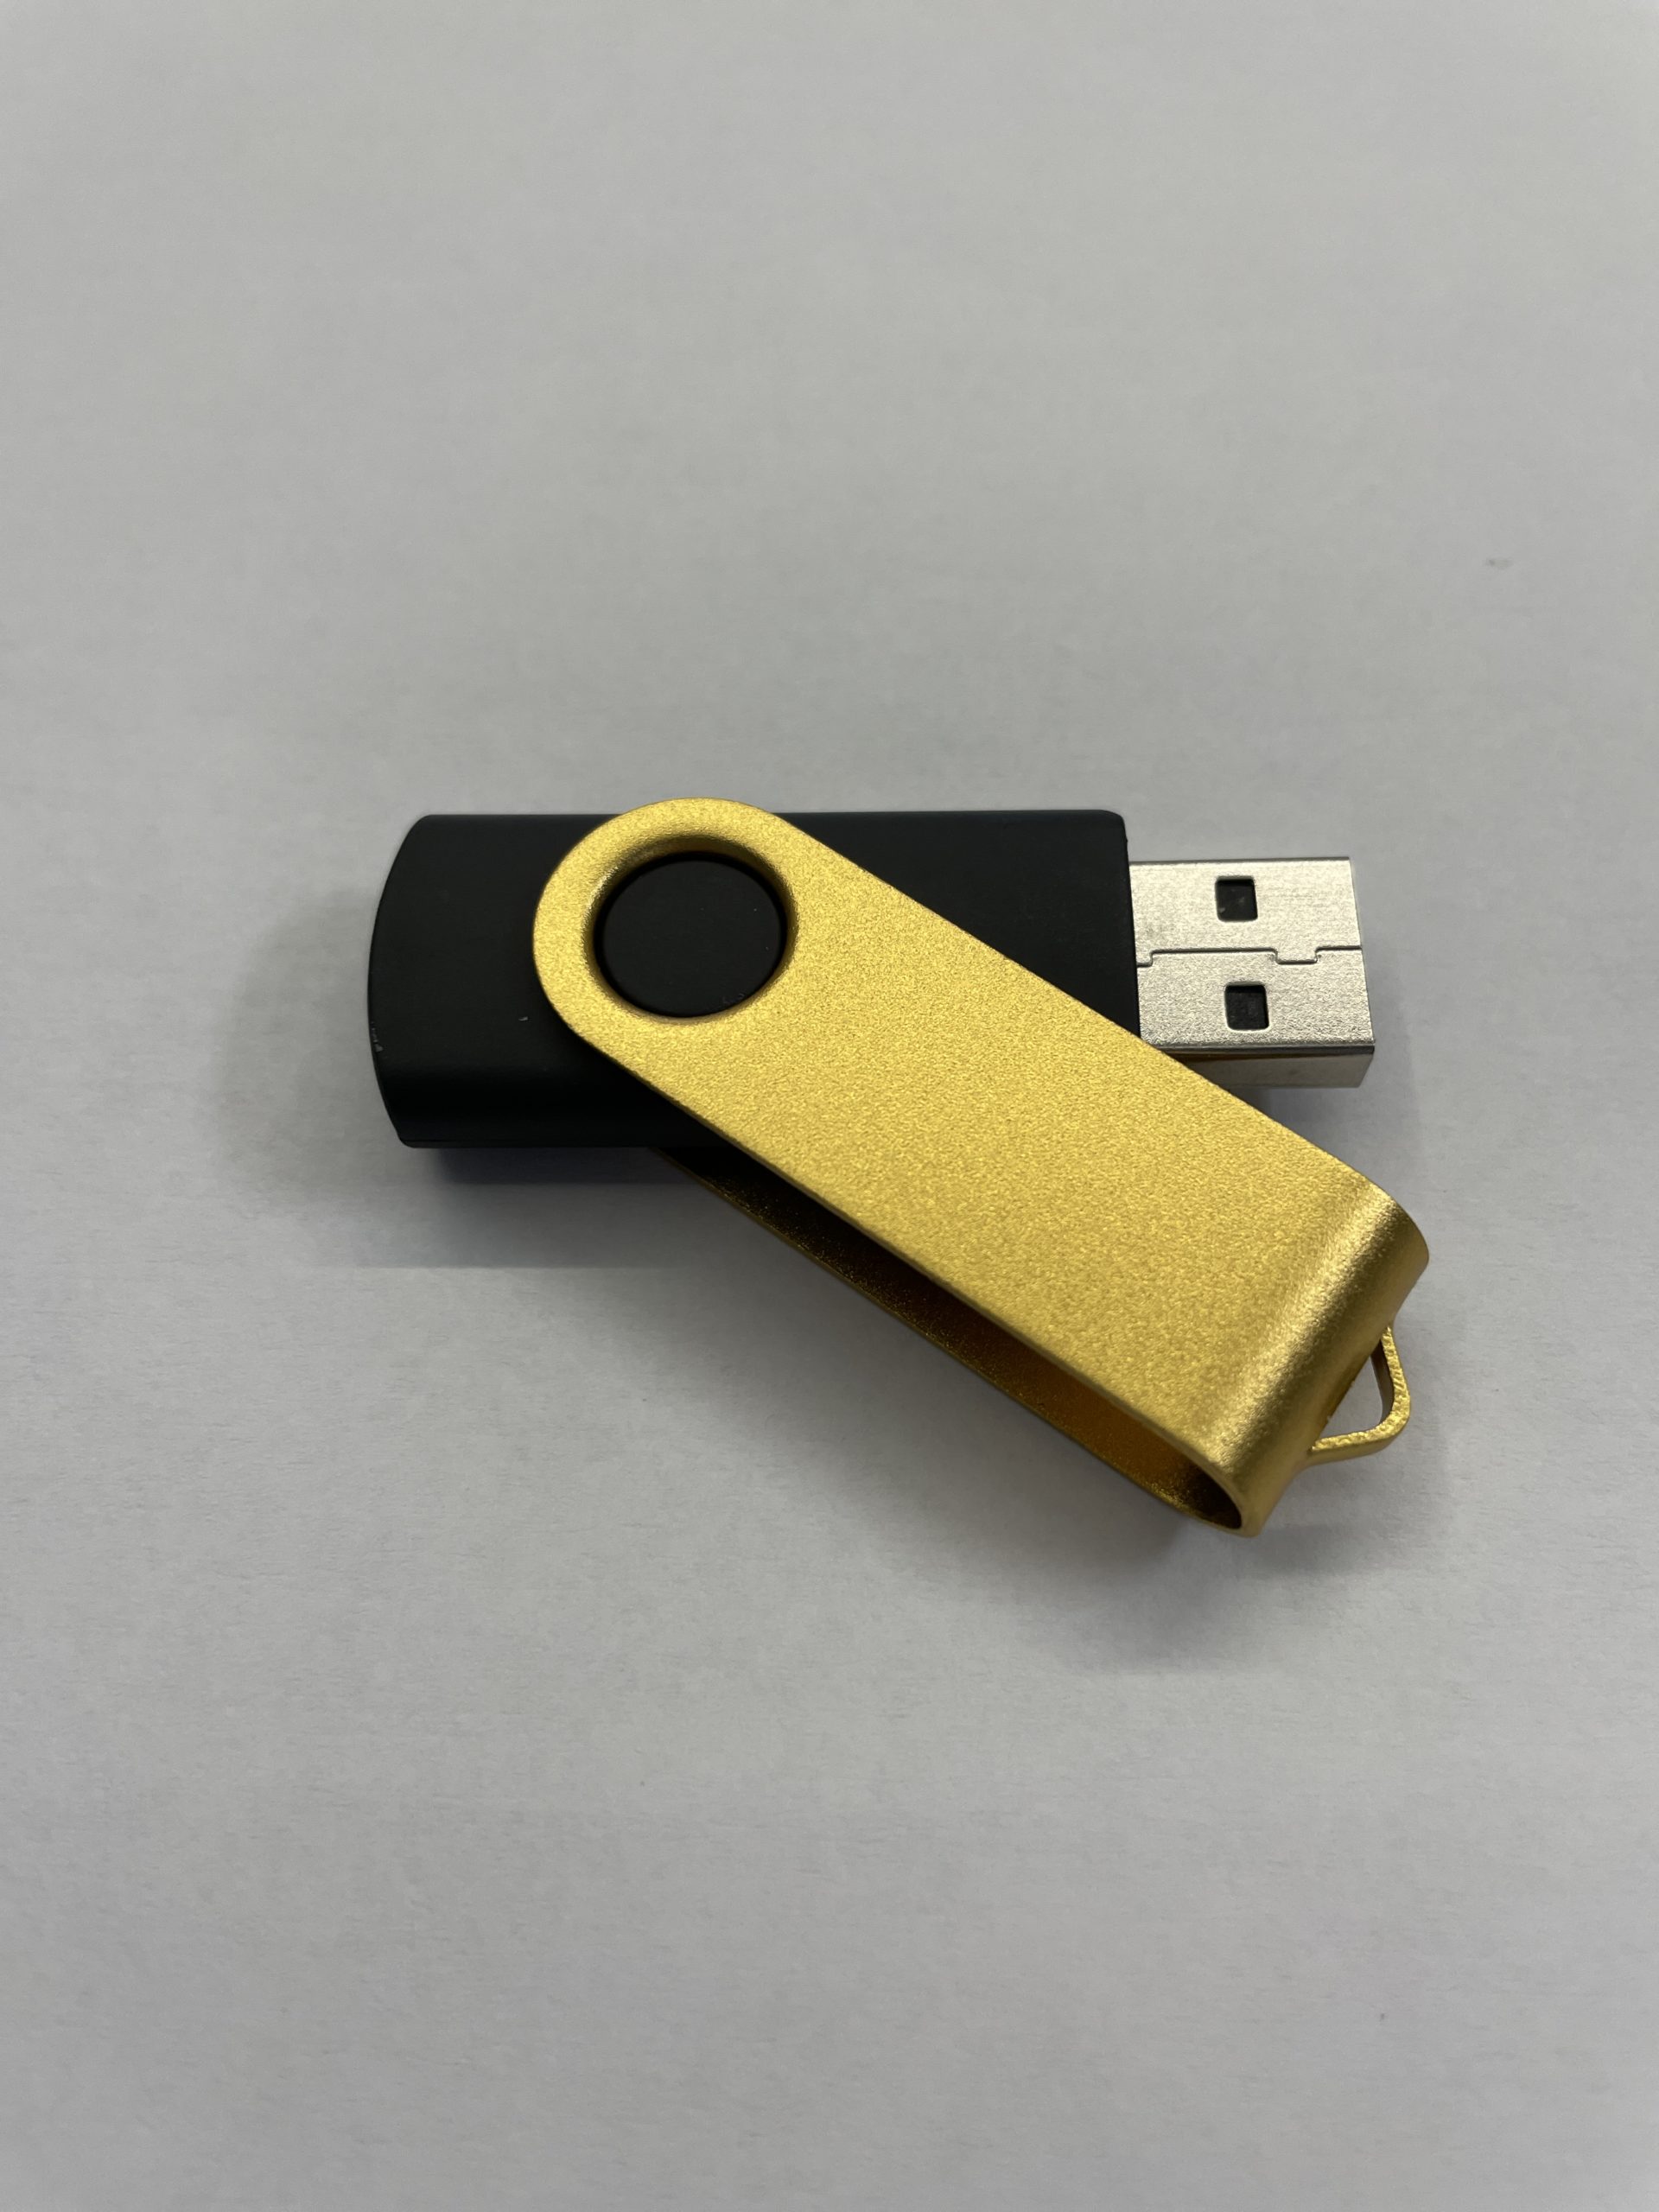 2TB Flash Drive Scam: Why Flash Drives Fakes - Datarecovery.com